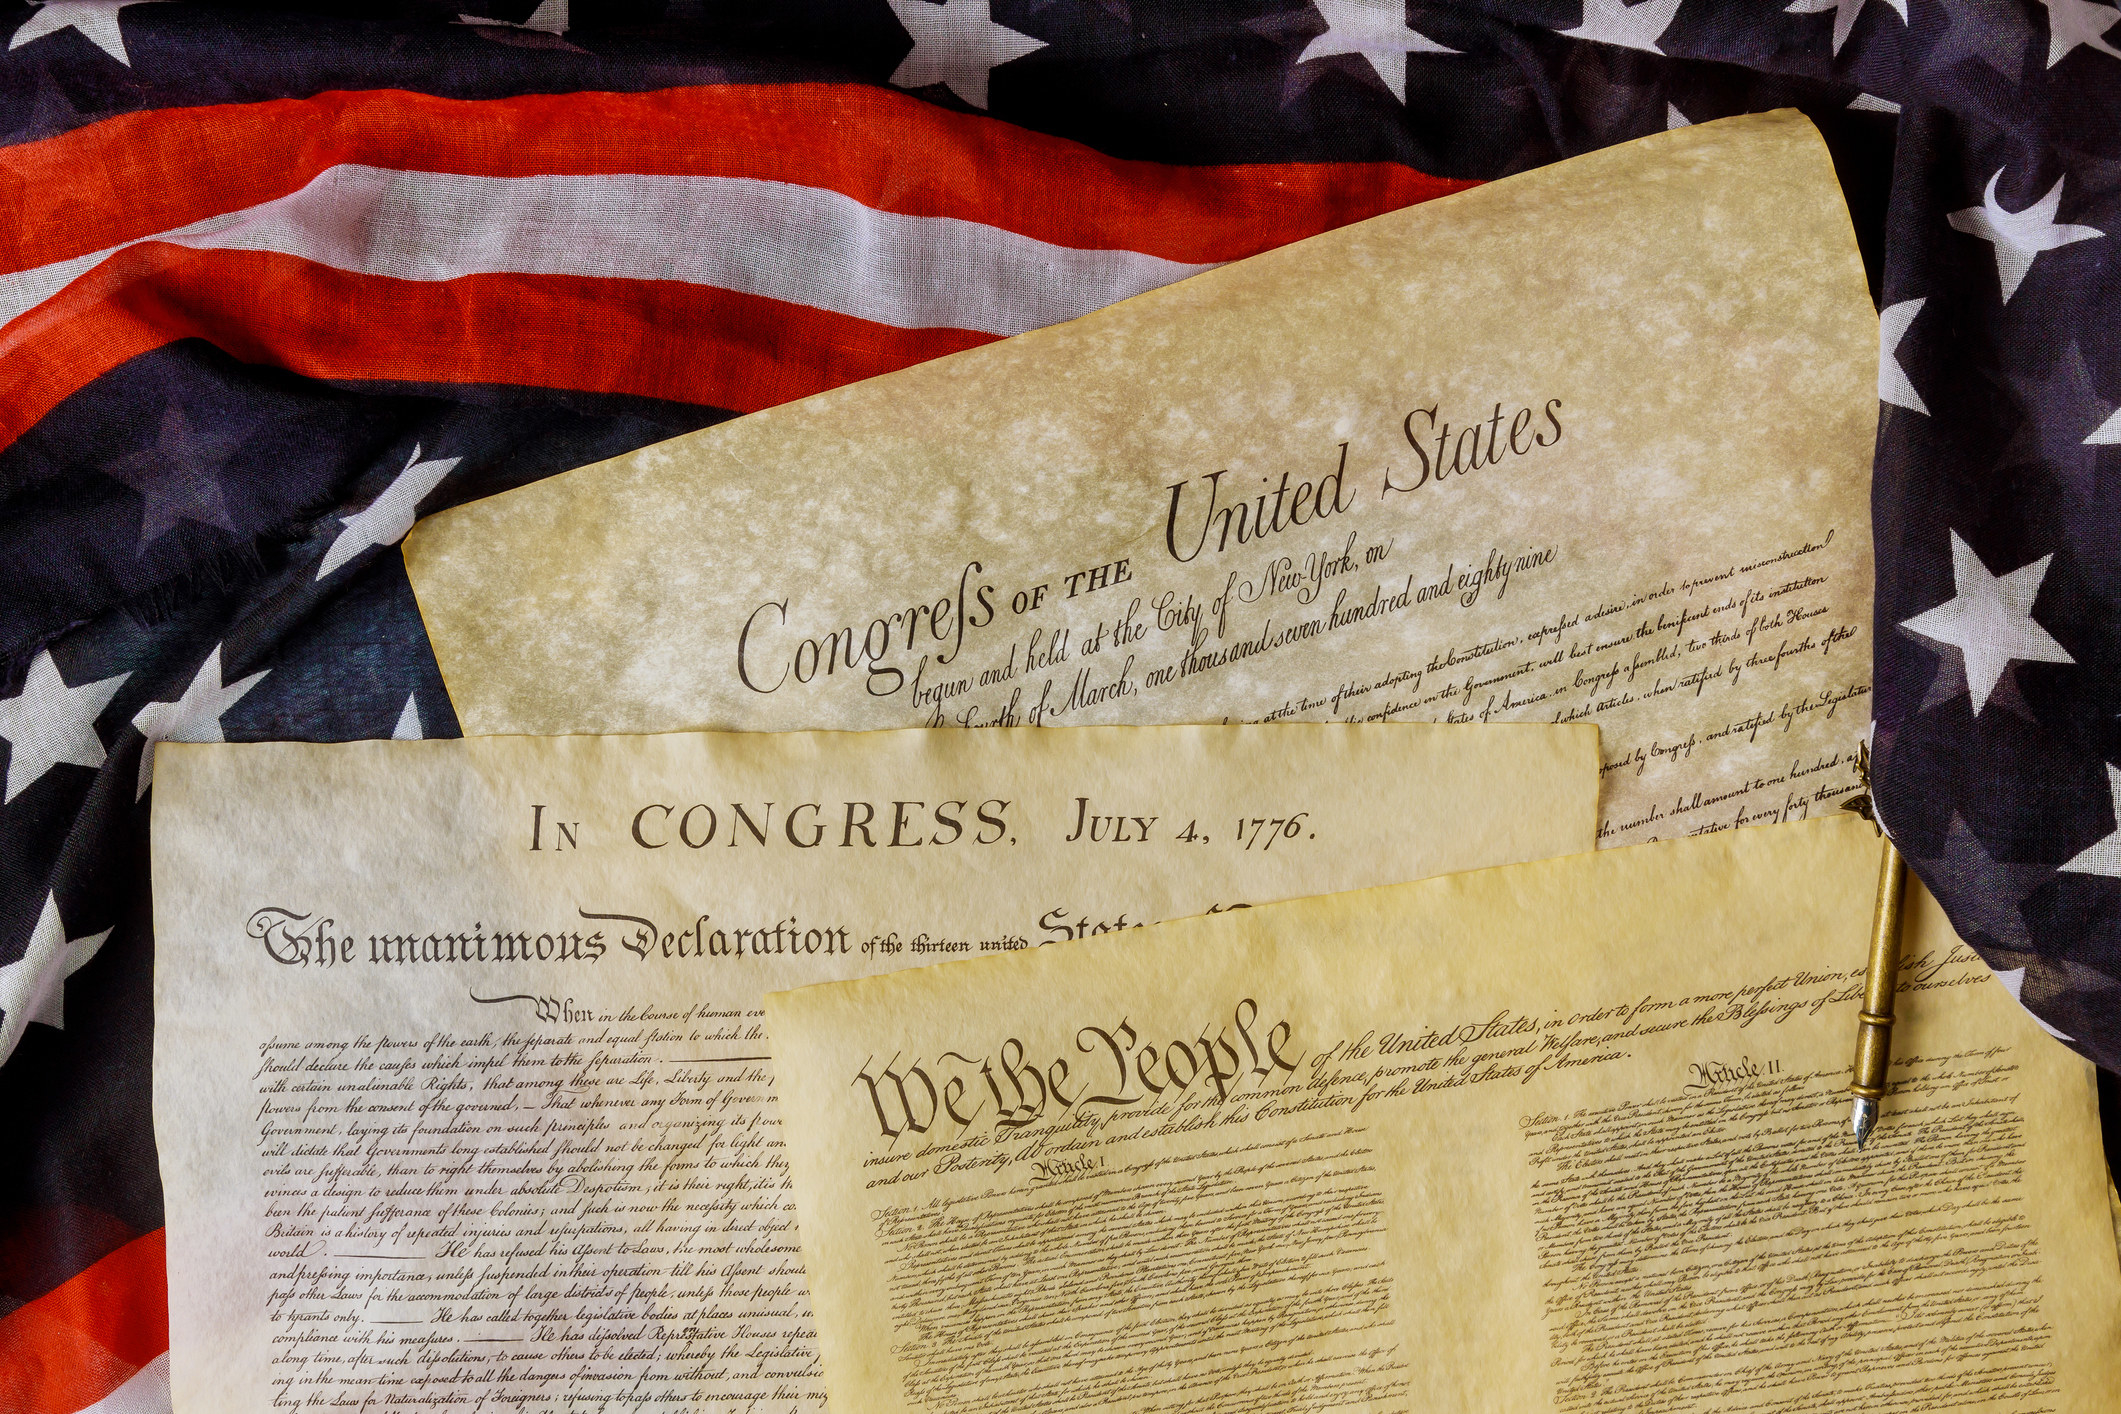 an American flag and federal documents like the US Constitution